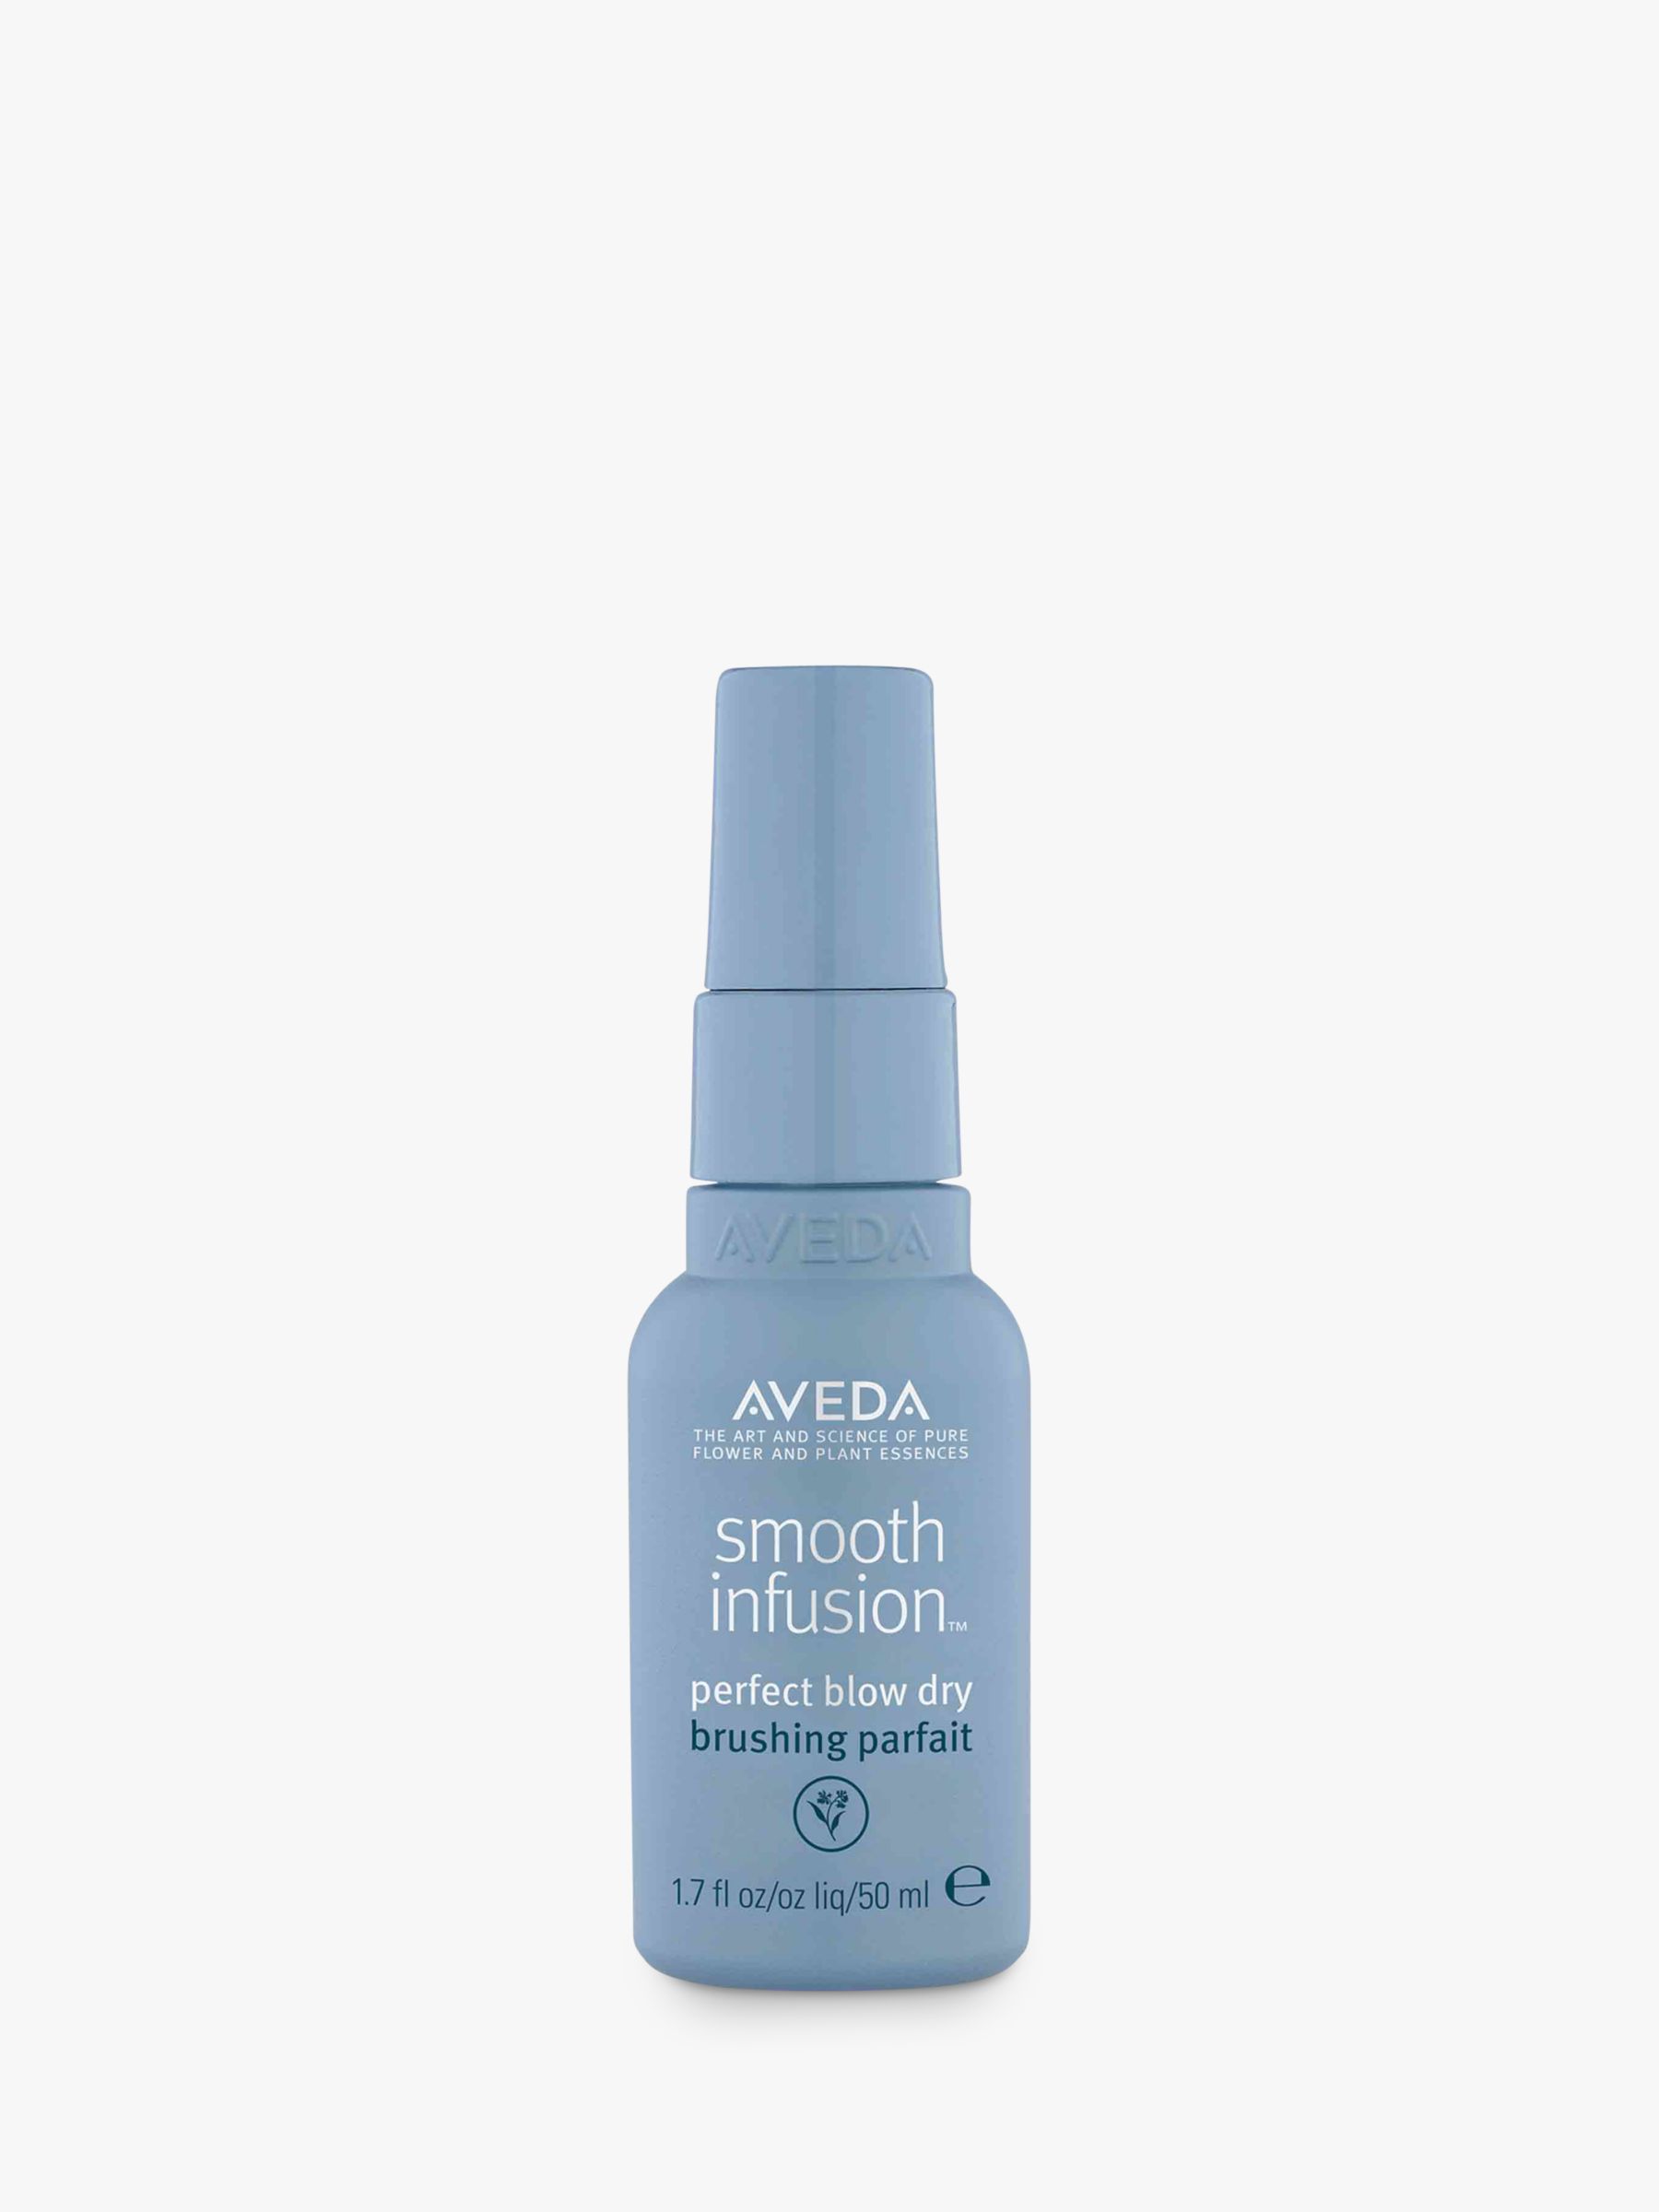 Aveda Smooth Infusion™ Perfect Blow Dry, 50ml